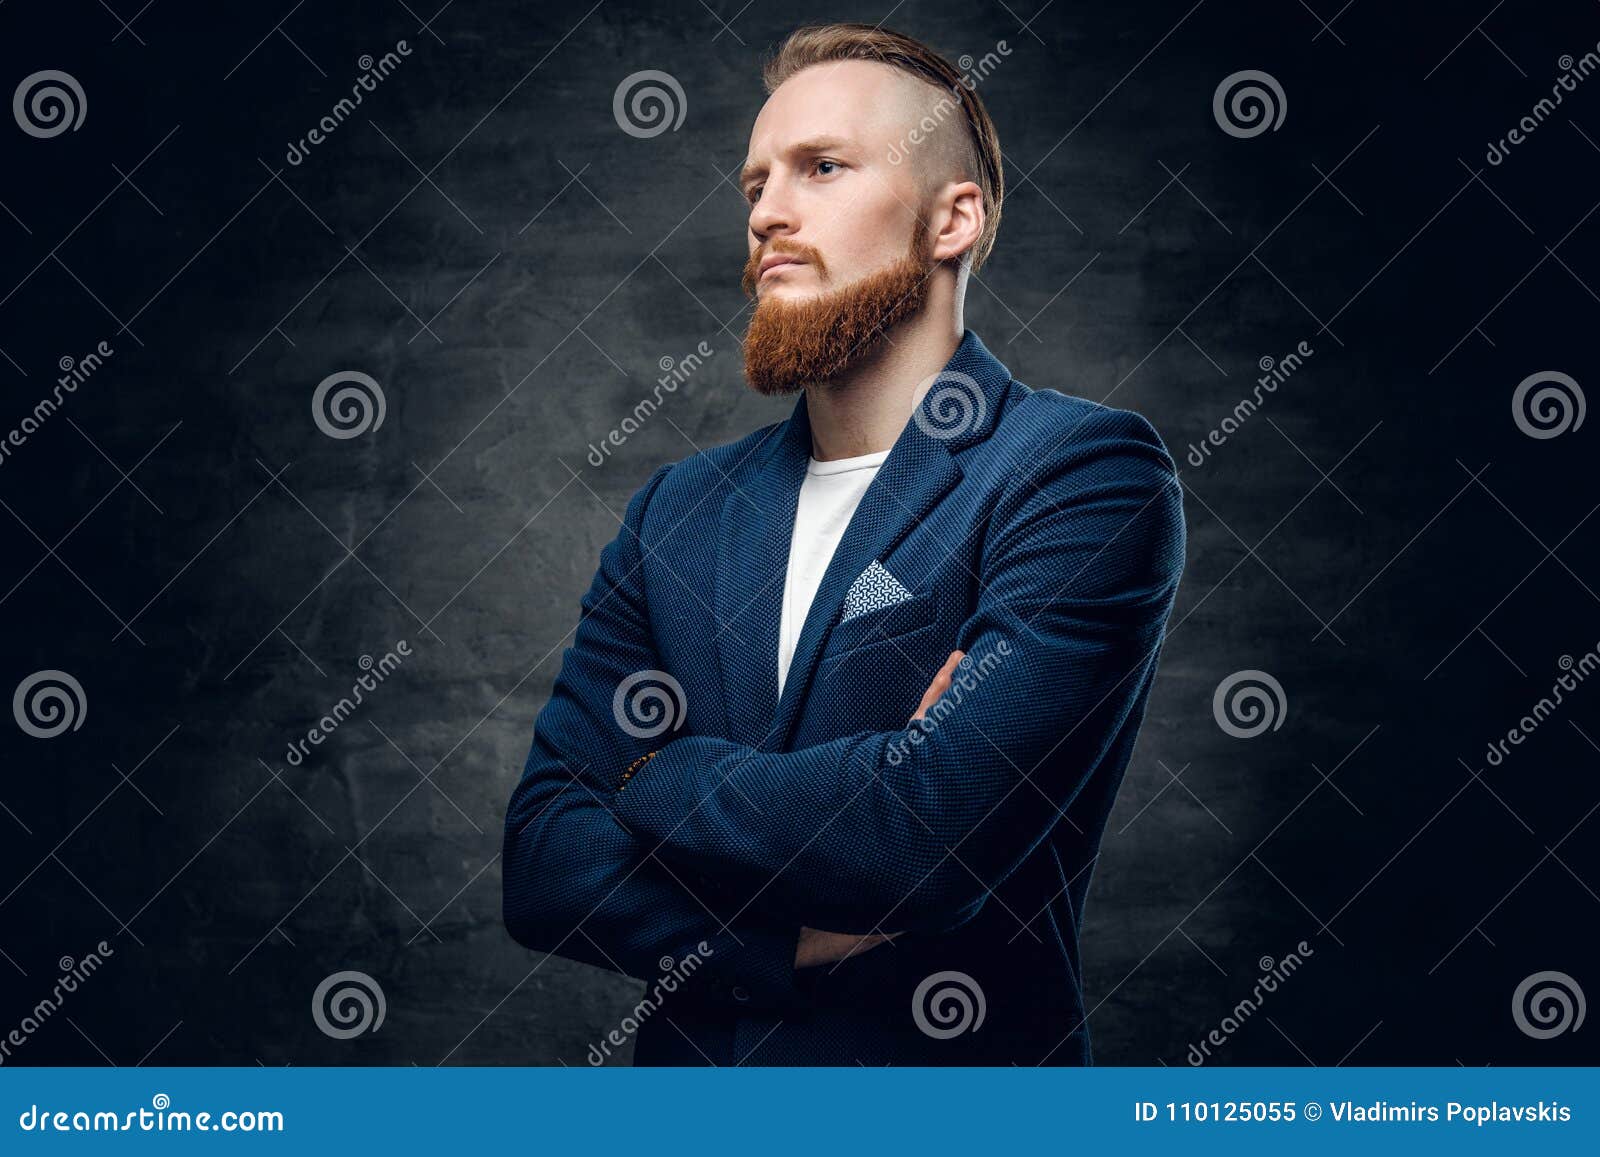 Redhead Hipster Male Dressed in a Blue Jacket. Stock Image - Image of ...